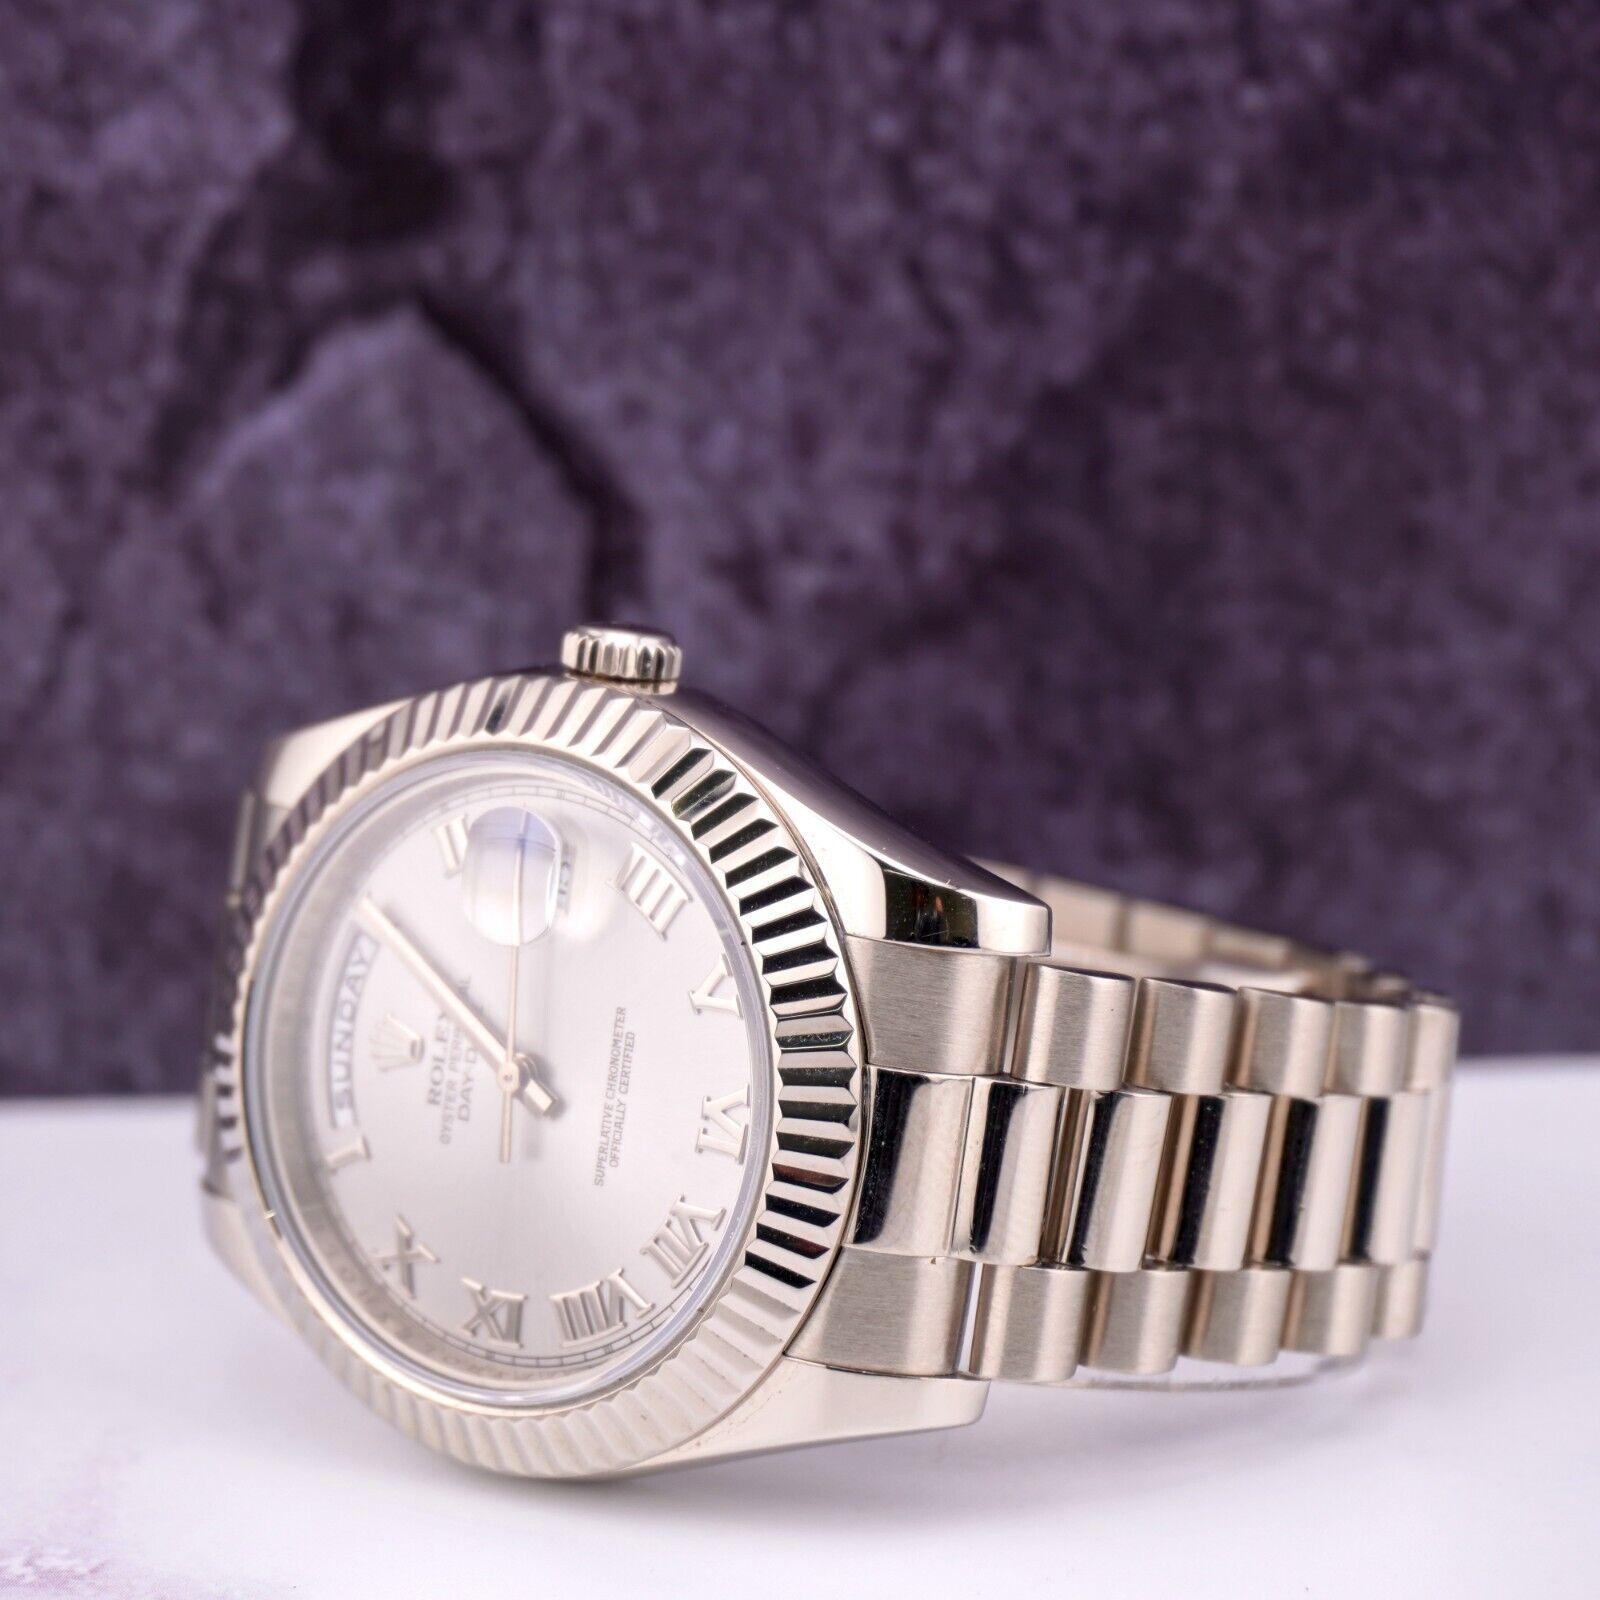 Rolex Day-Date 40 President 18k White Gold Men's Watch Silver DIAL Ref: 218239 In Excellent Condition For Sale In Pleasanton, CA